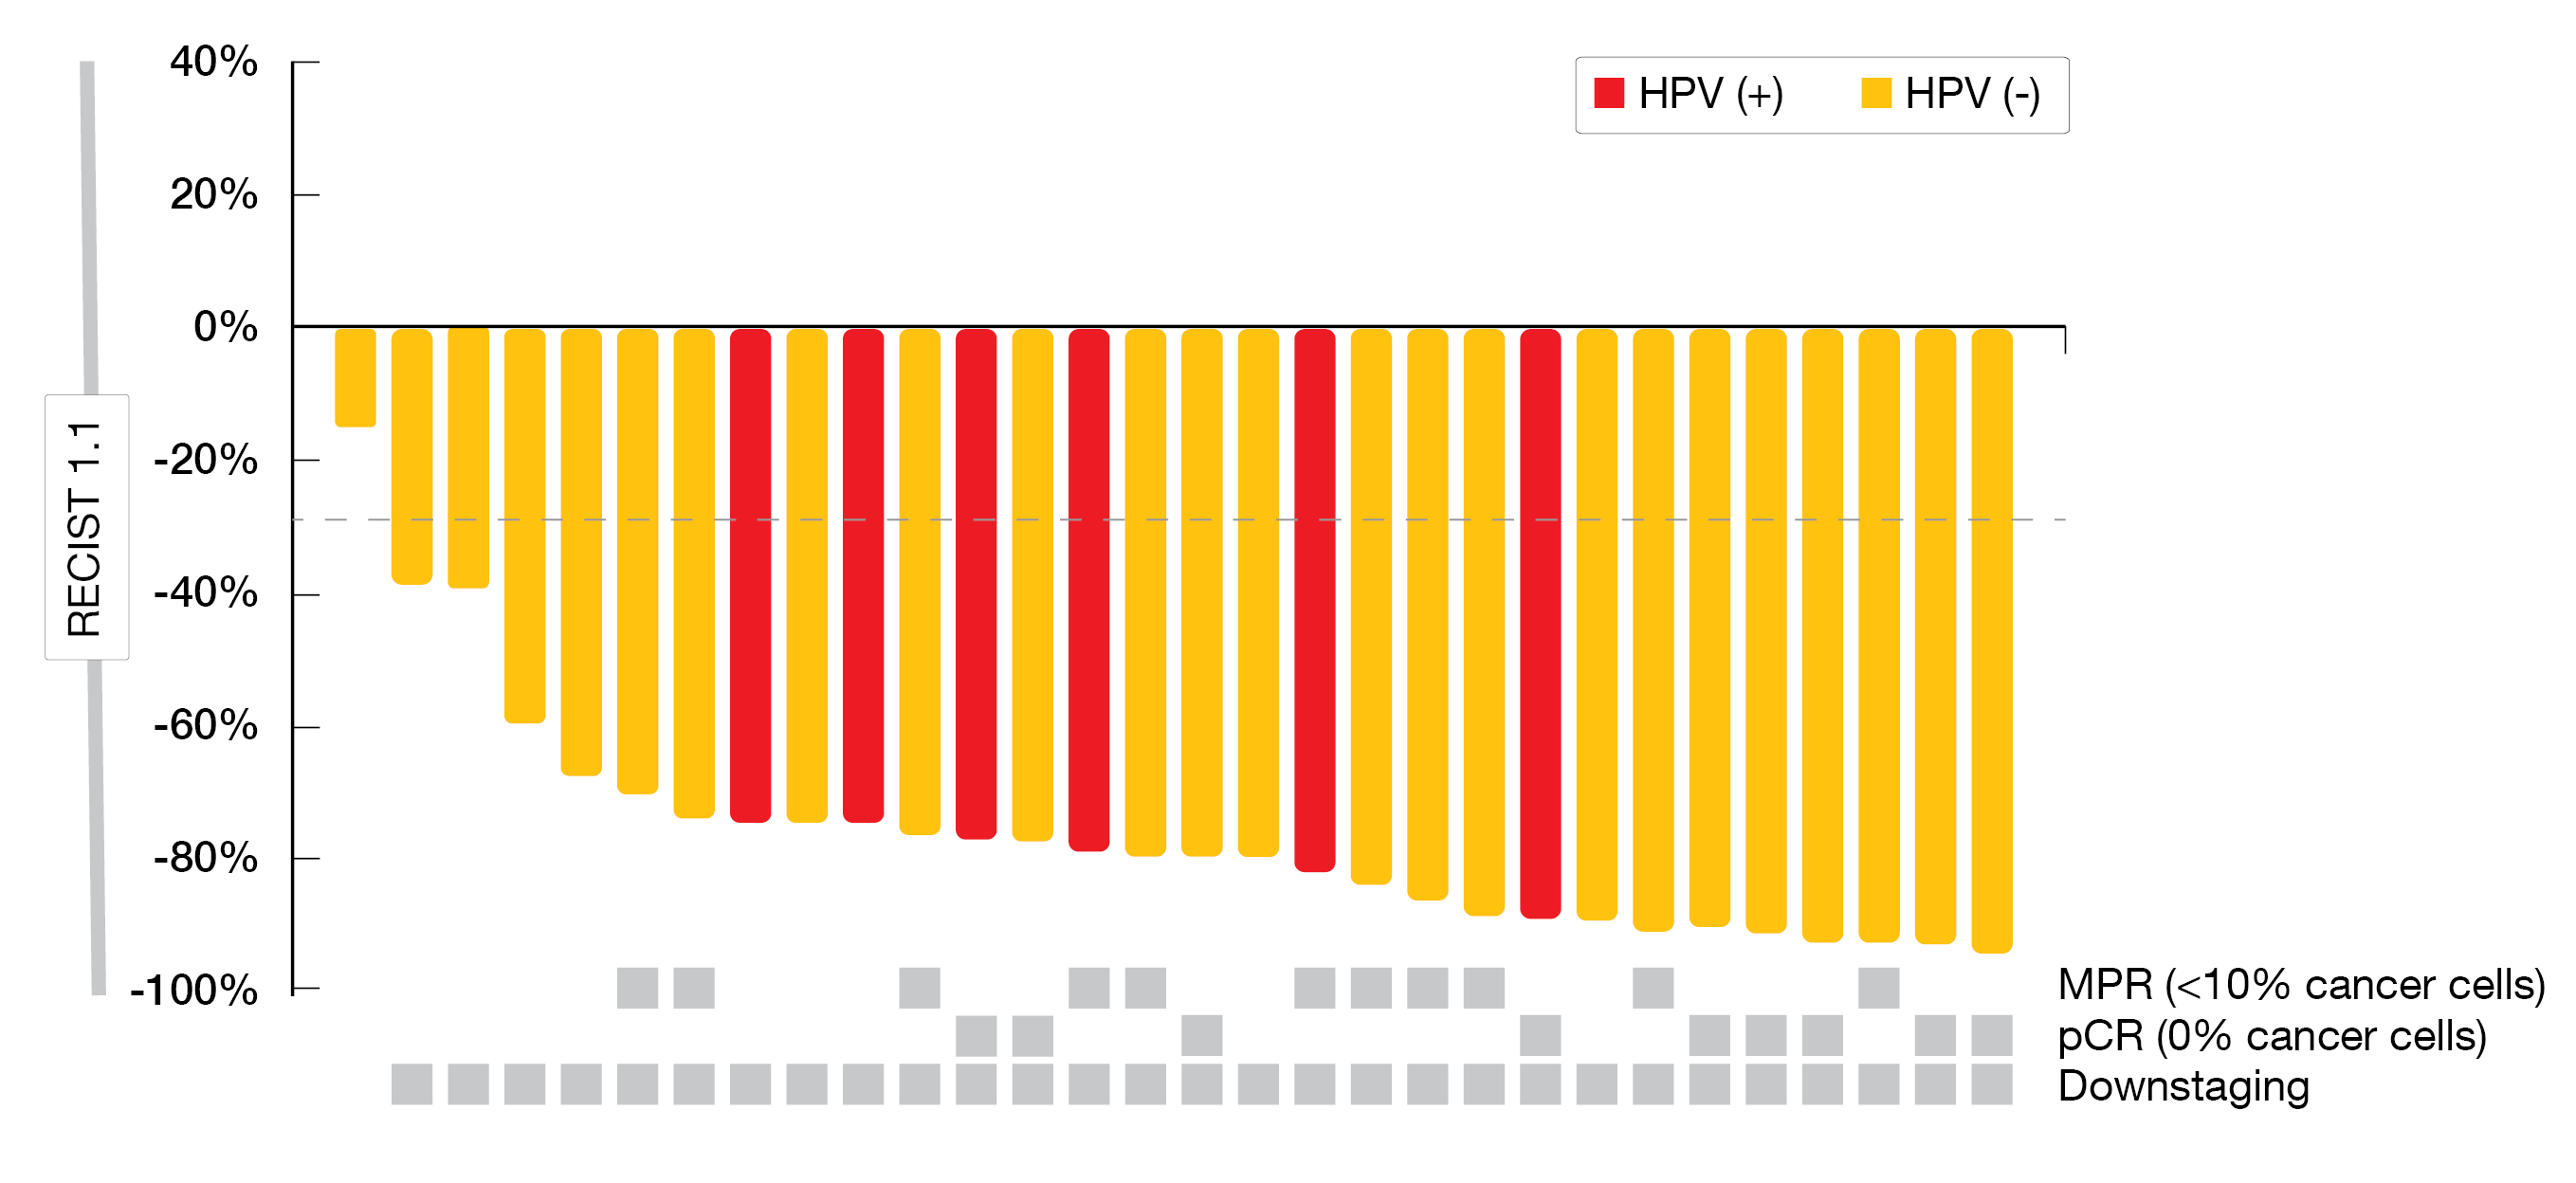 Figure 3: Tumor response per RECIST v1.1 and pathological assessment according to HPV status.